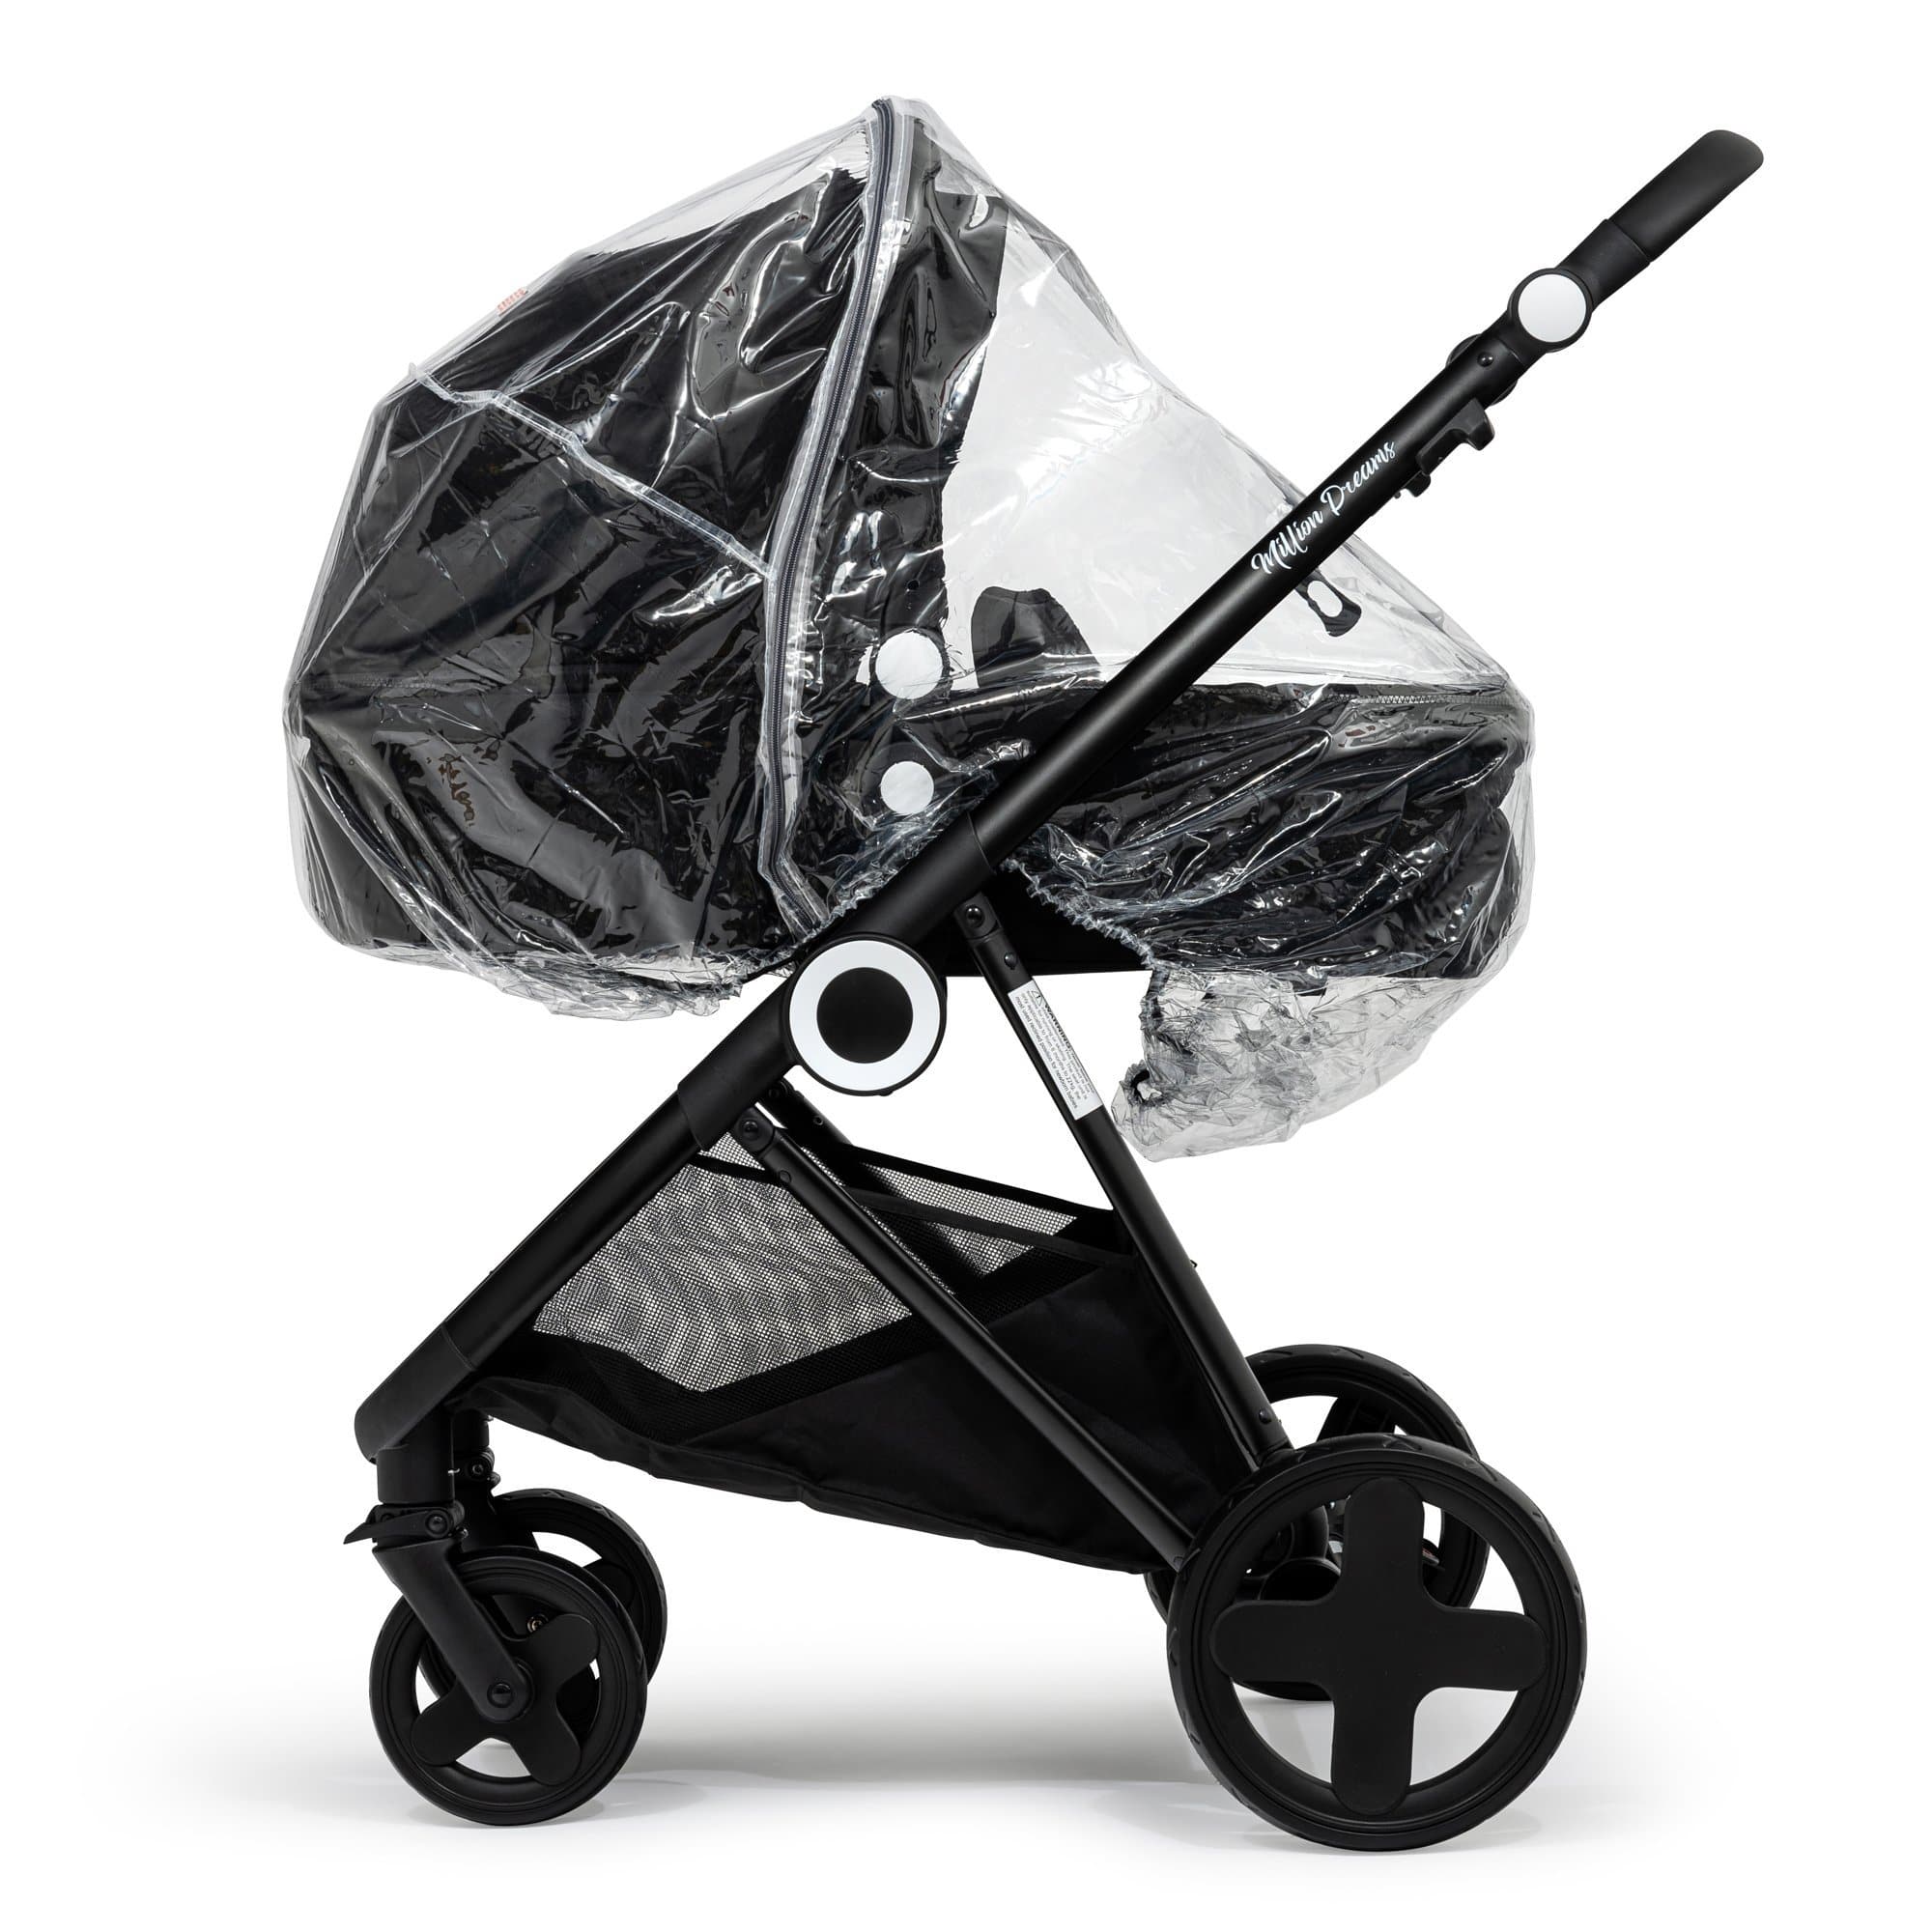 2 in 1 Rain Cover Compatible with Jane - Fits All Models - For Your Little One